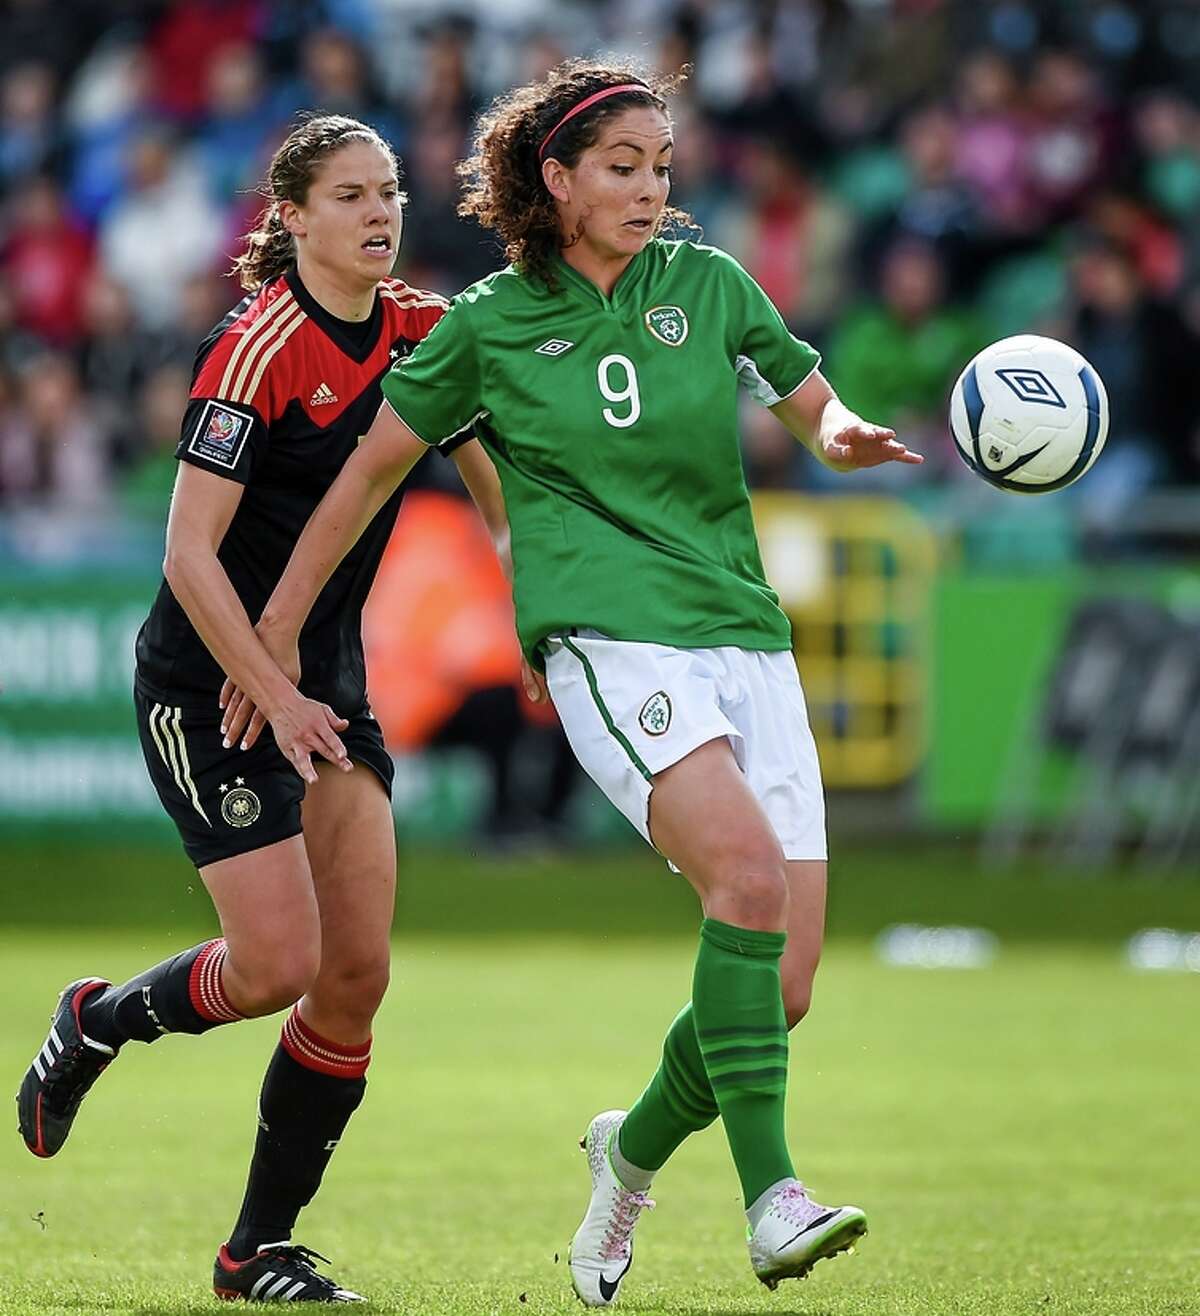 Fiona O’Sullivan returns to the Bay Area this week as one of the top players on Ireland’s national team.